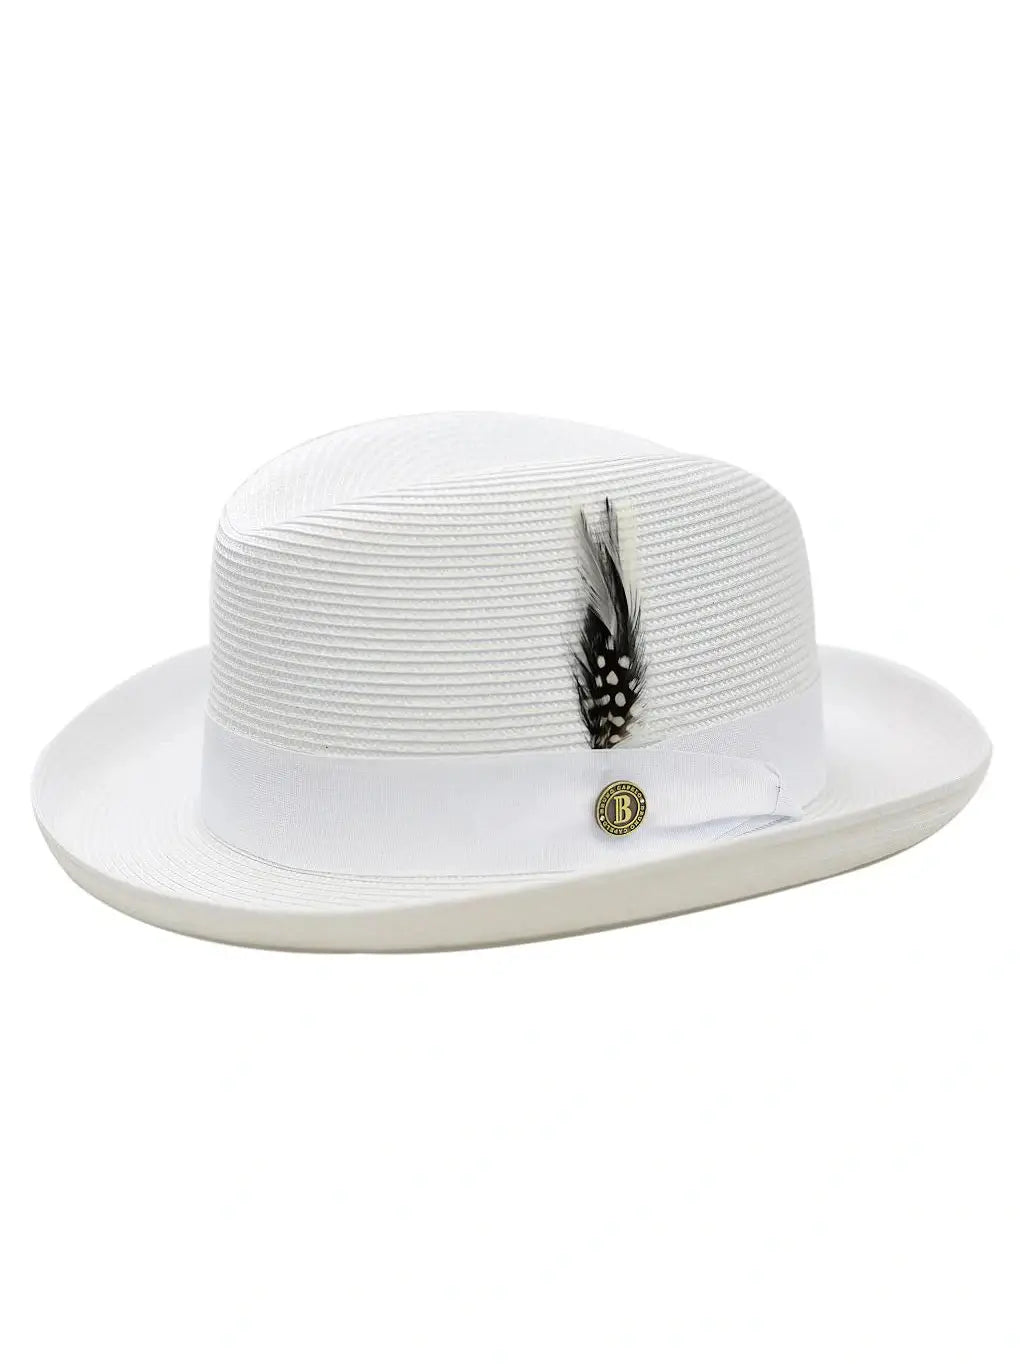 Mens The Godfather White Straw Hat